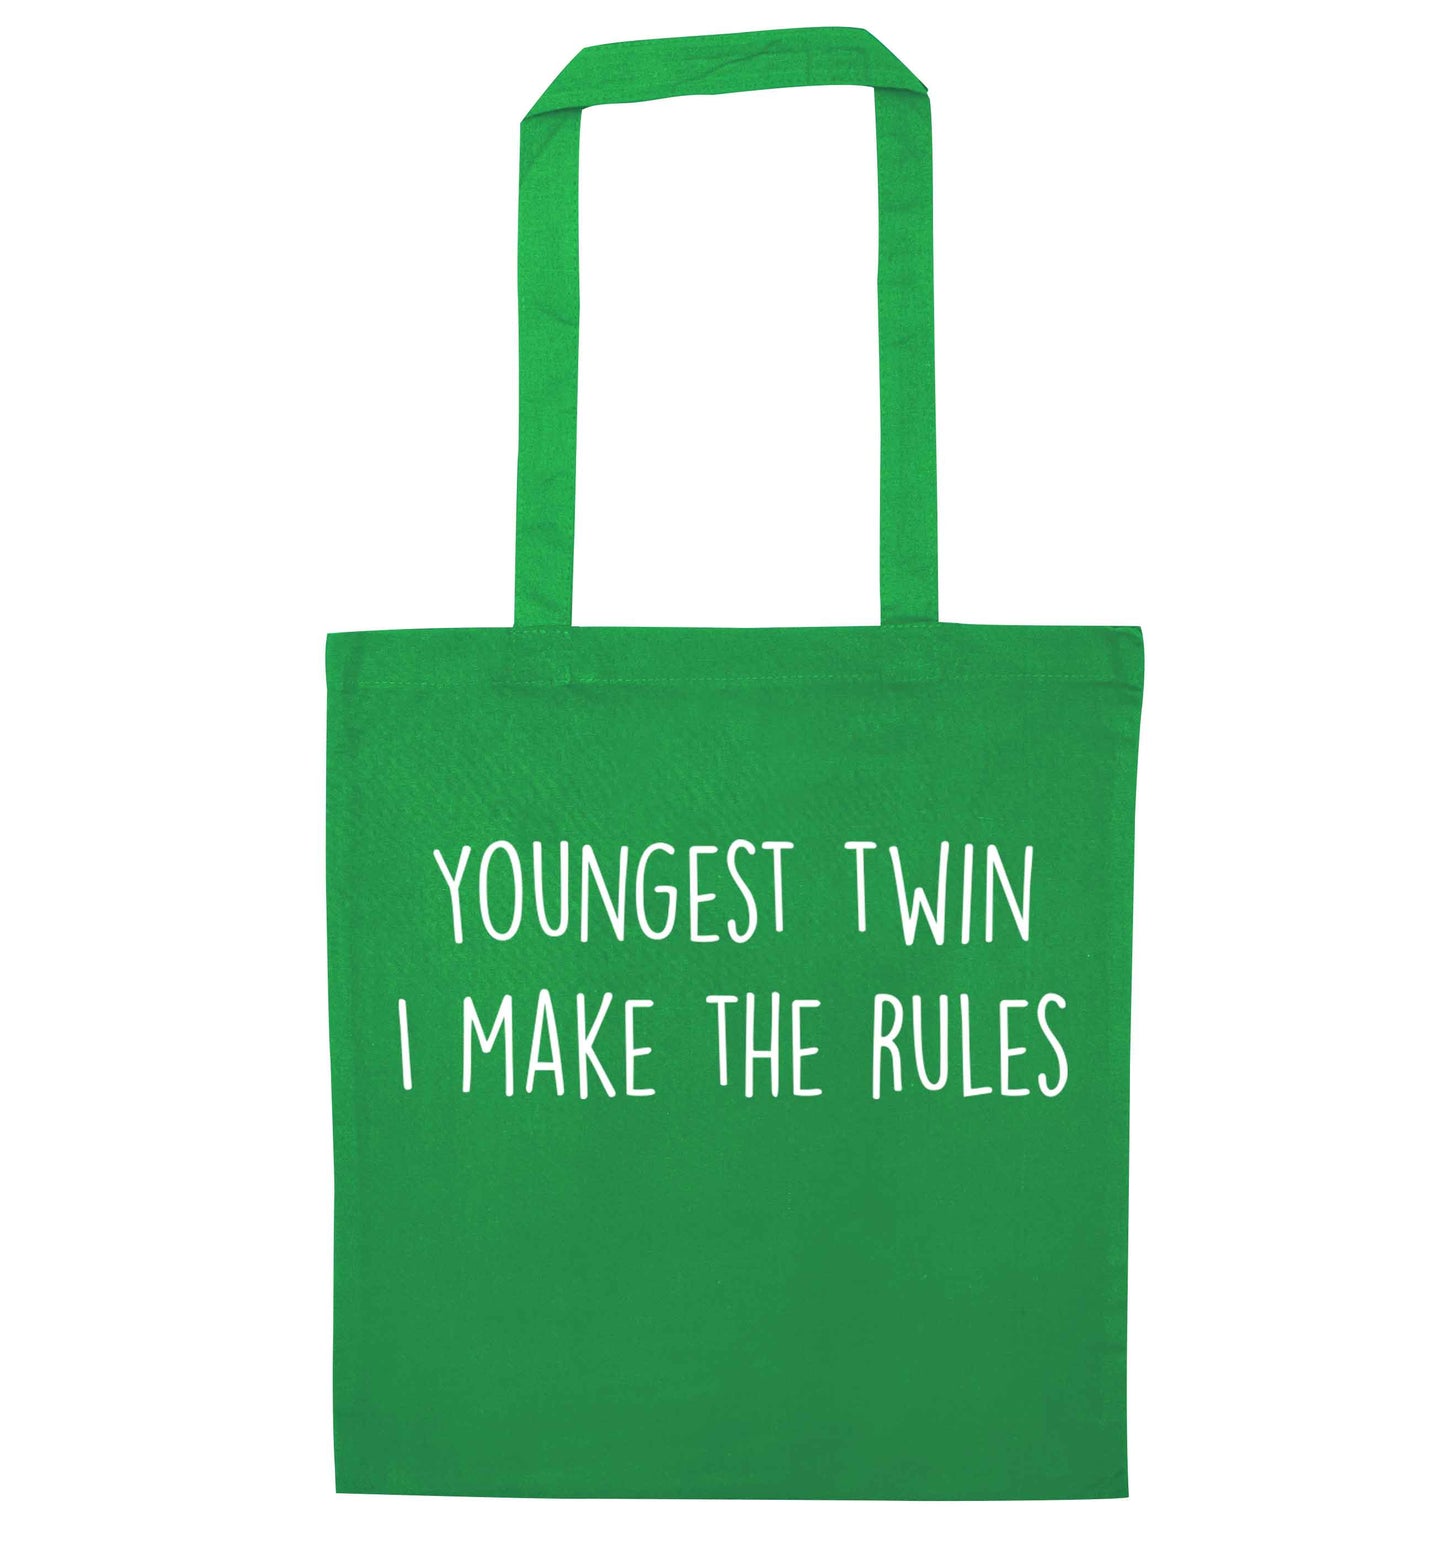 Youngest twin I make the rules green tote bag